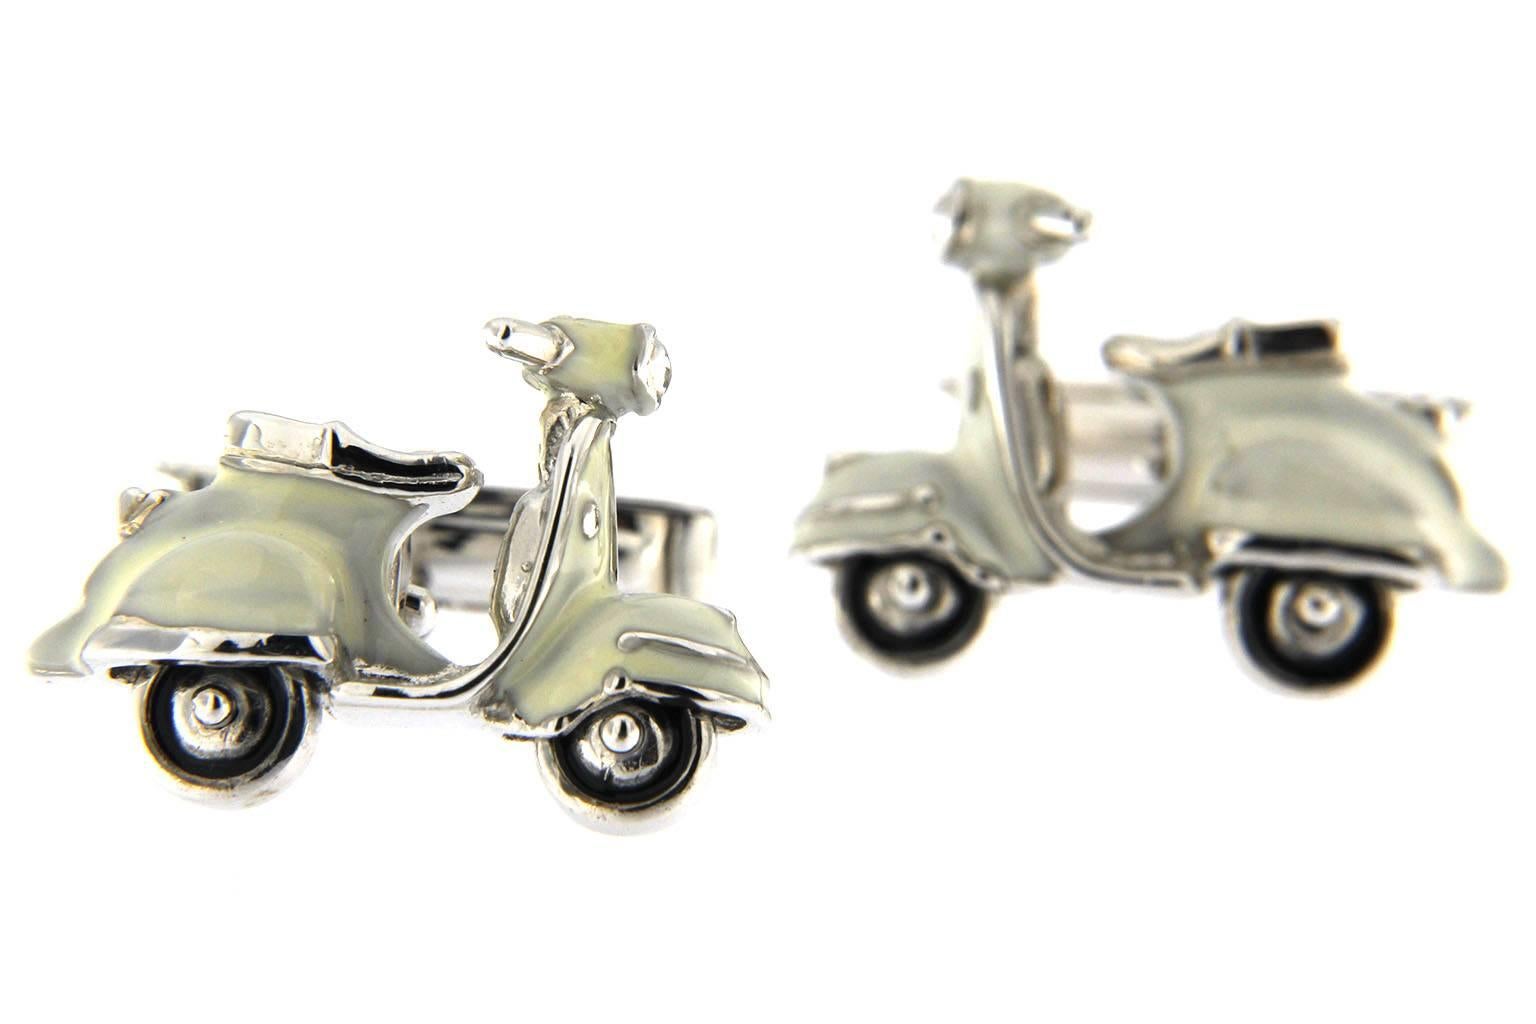 Jona design collection, hand crafted in Italy, sterling silver scooter cufflinks with rotating wheels and black enamel.
Dimensions : H 0.65 in x W 0.90 in x D 0.20 in - H 16.60 mm x W 23.05 mm X D 5.17 mm.
All Jona jewelry is new and has never been